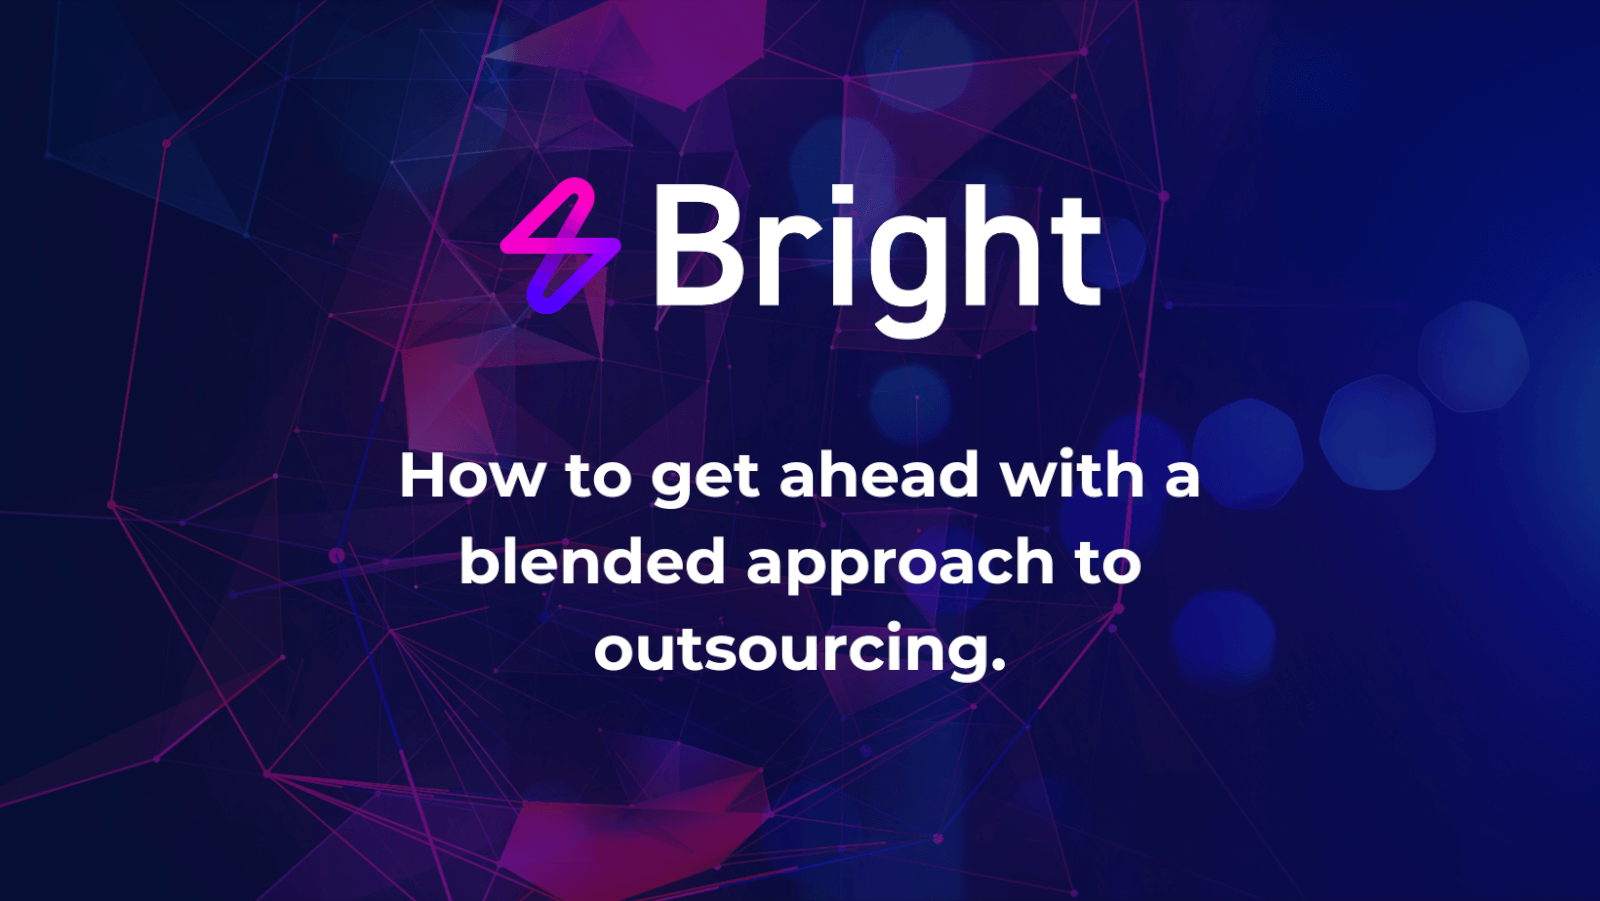 How to get ahead with a blended approach to outsourcing